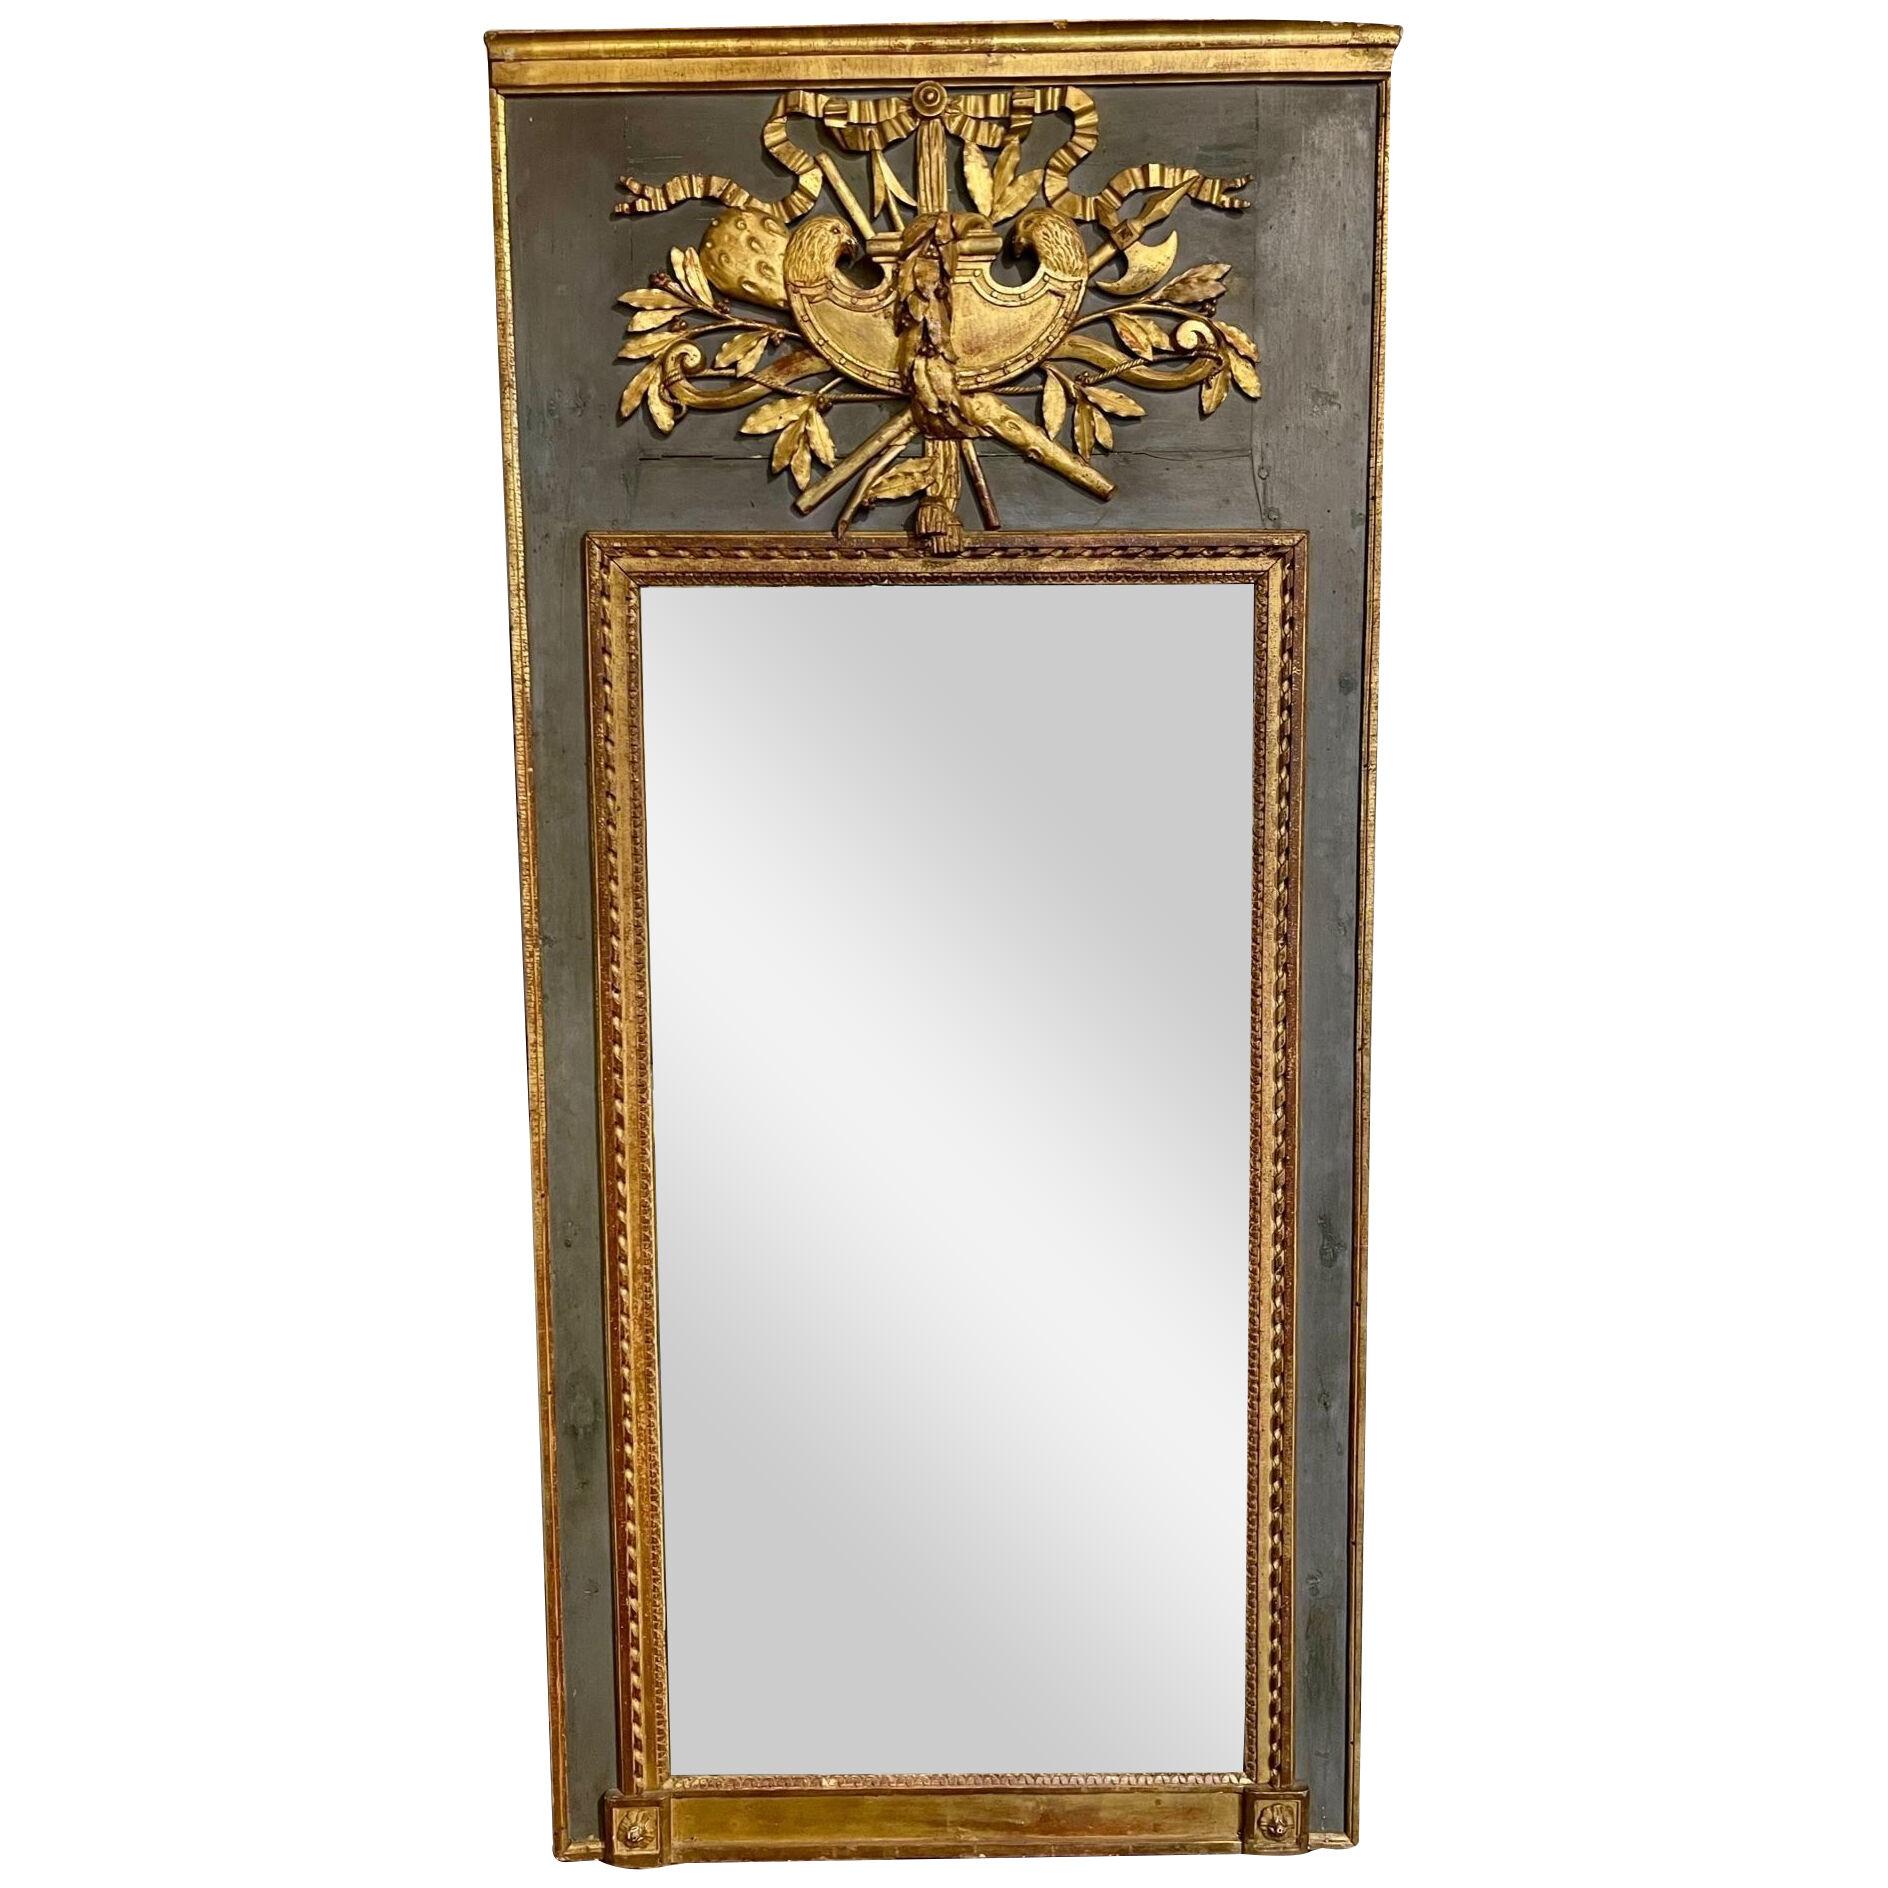 18th Century French Carved and Parcel Gilt Trumeau Mirror